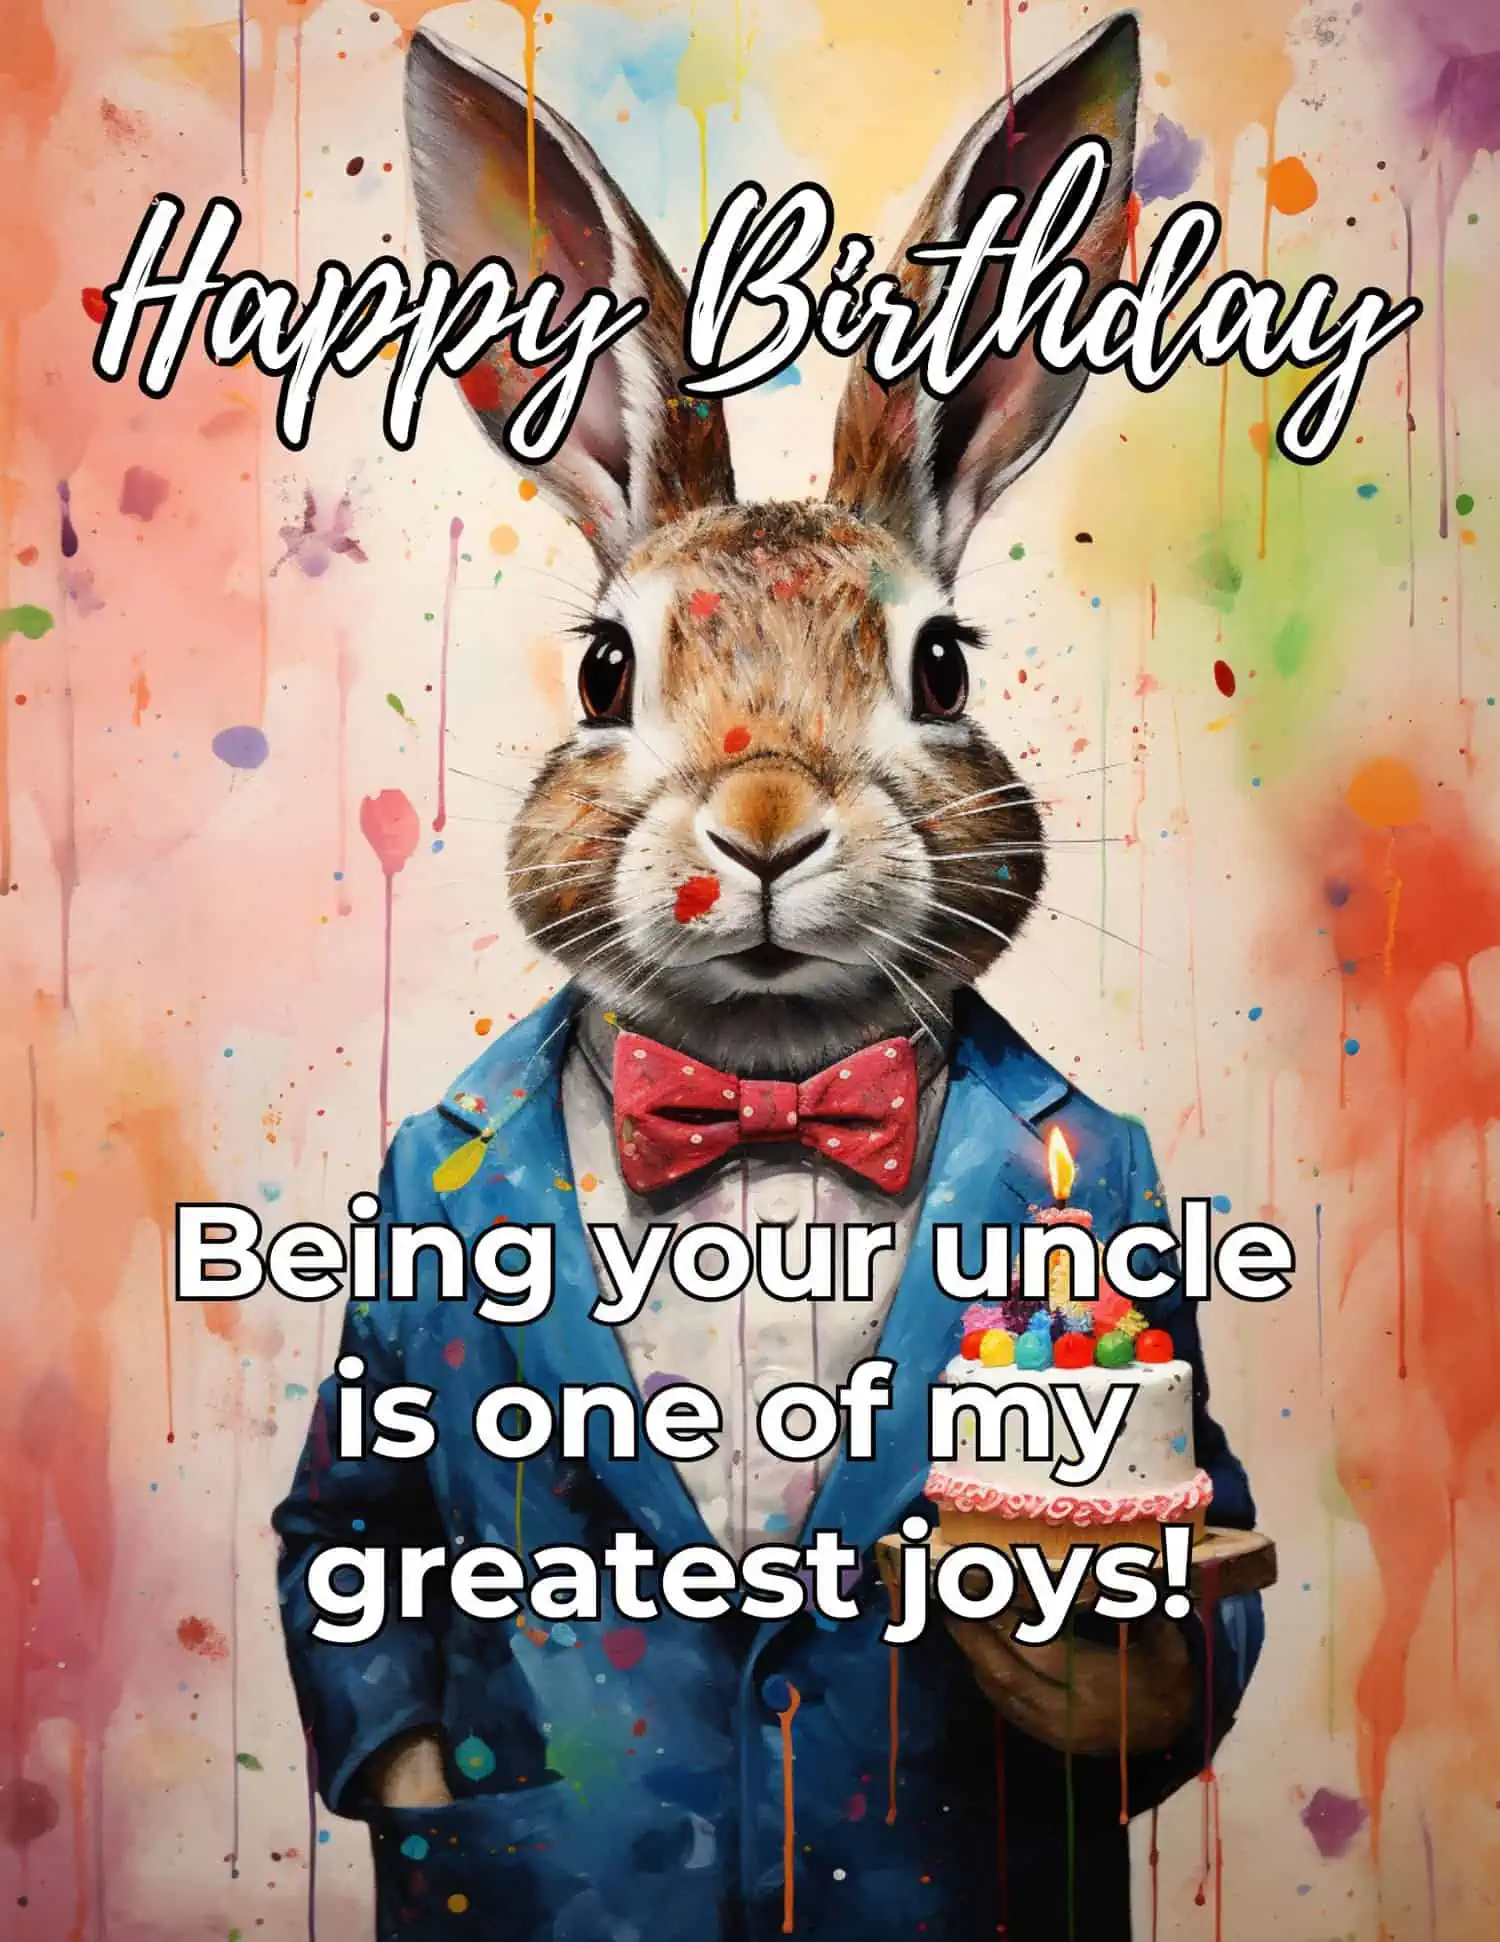 A collection of warm and thoughtful birthday wishes from an uncle to his beloved niece.